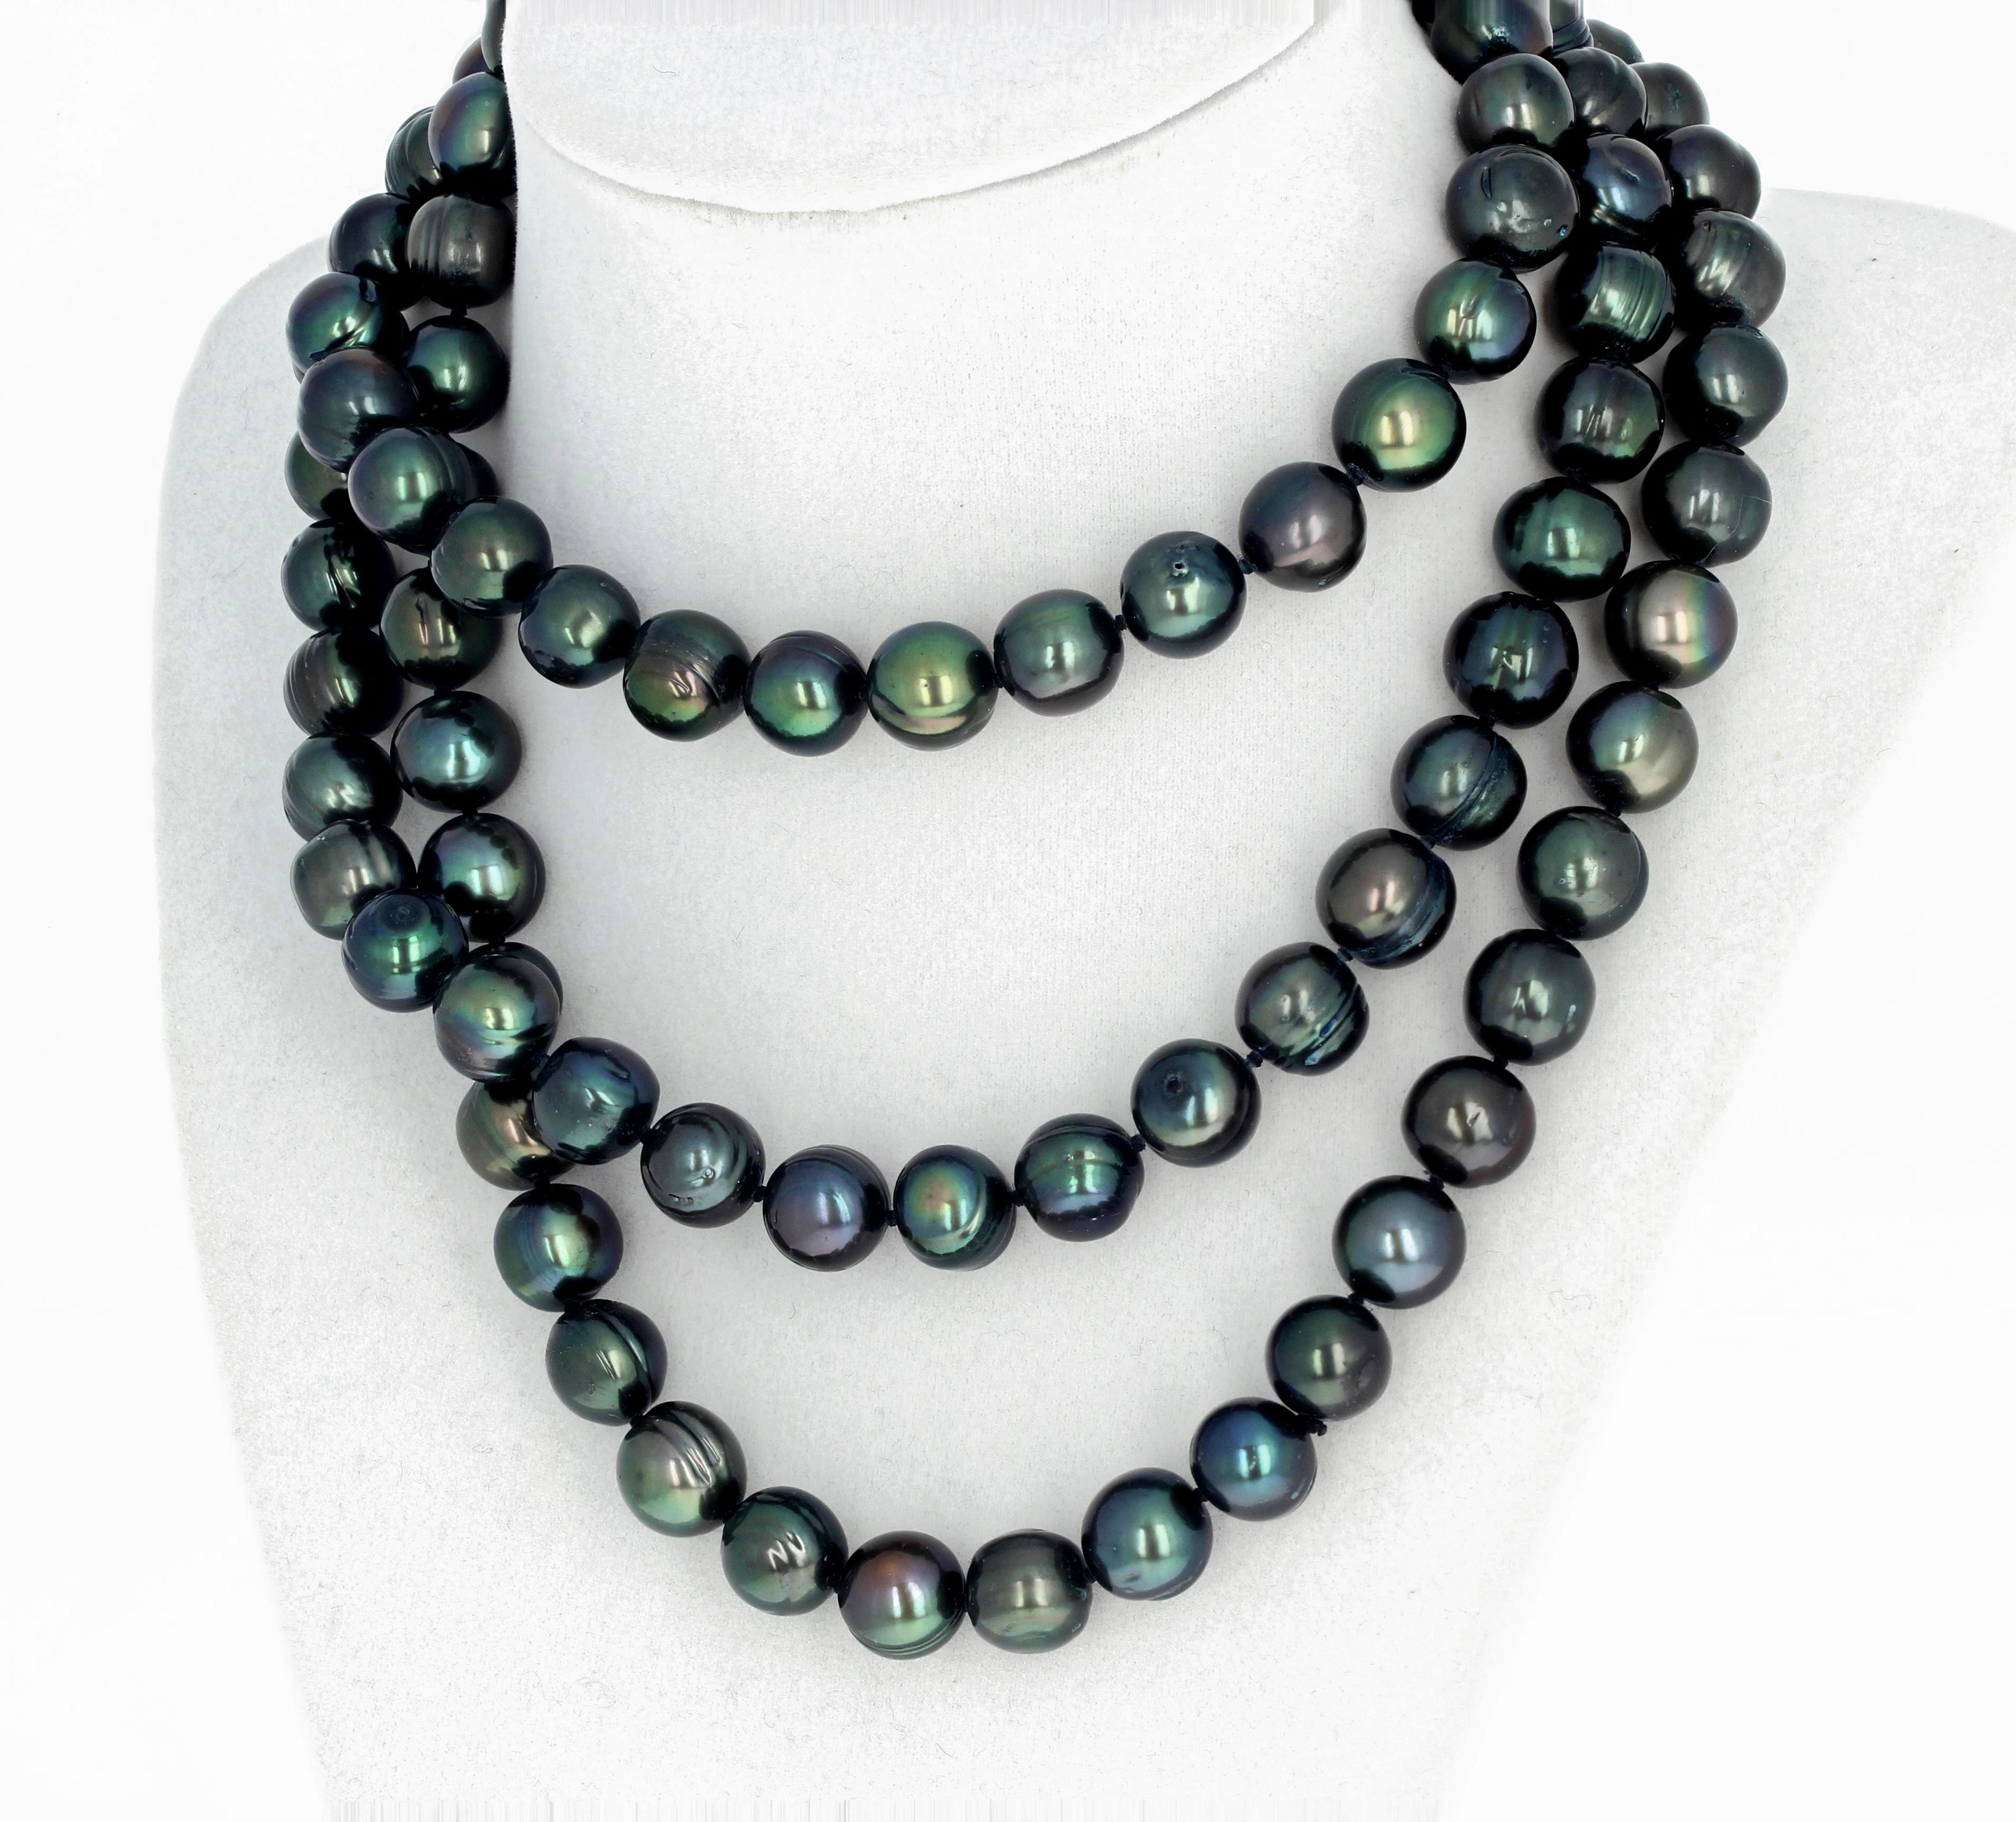 Glowing brilliant Fireball type freshwater endless cultured Pearls with a slightly greenish tone 48 inches long and measure approximately 10.5 to 11 mm round.  This is a continuous necklace with no clasp so you can swing it around your neck several